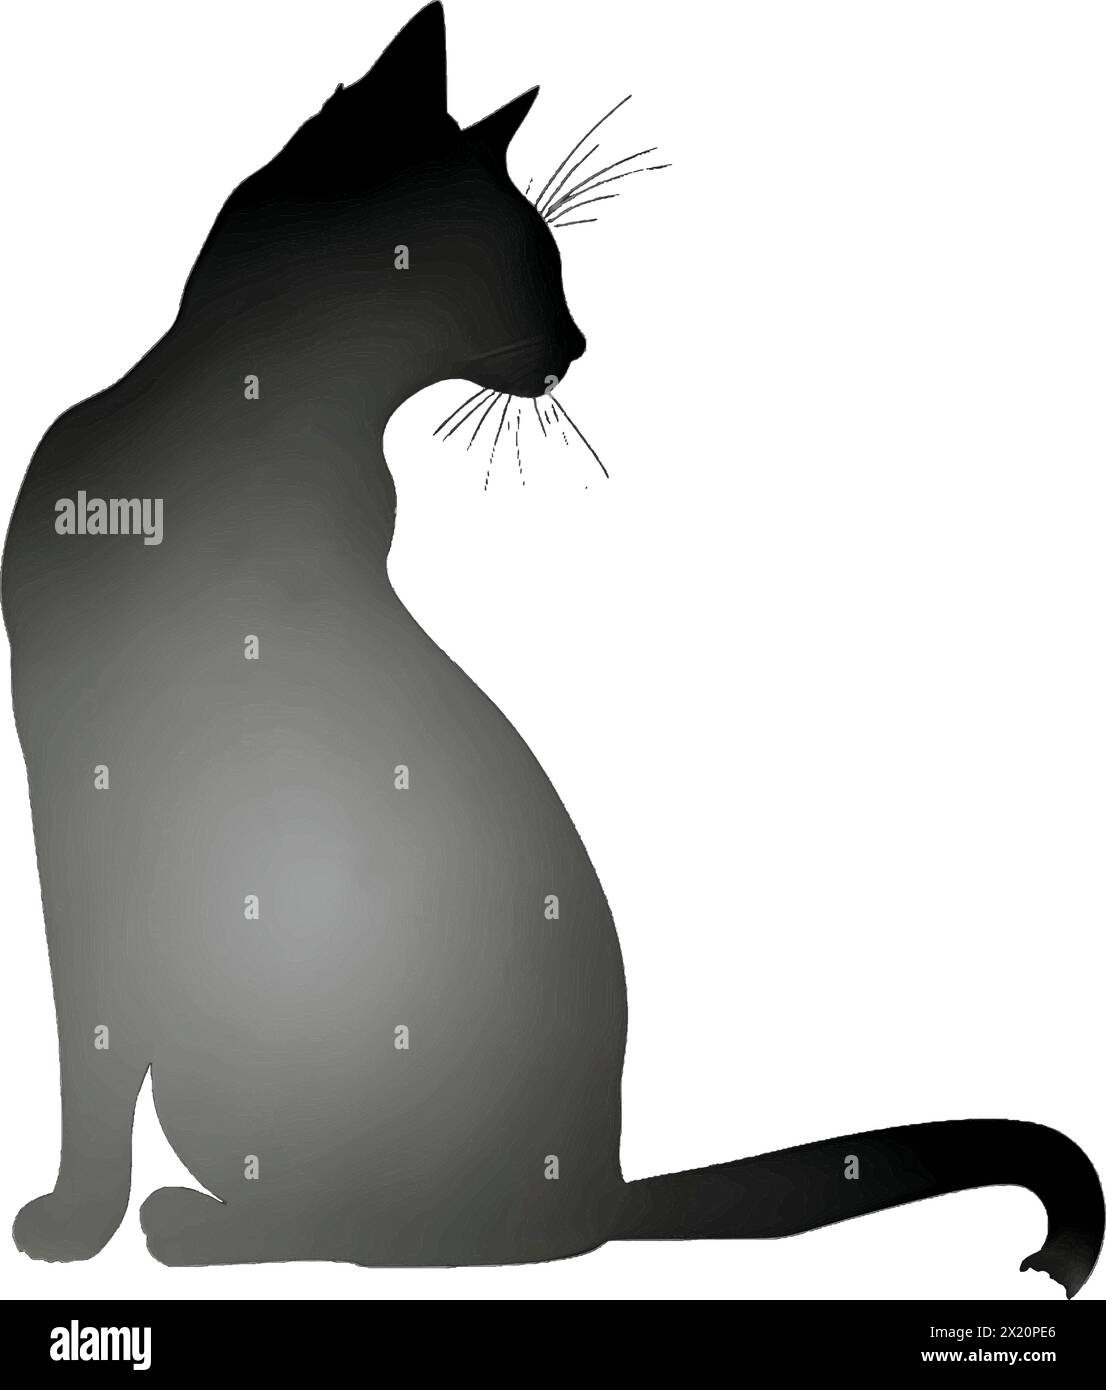 Vector illustration of a cat in black silhouette against a clean white background, capturing graceful forms. Stock Vector